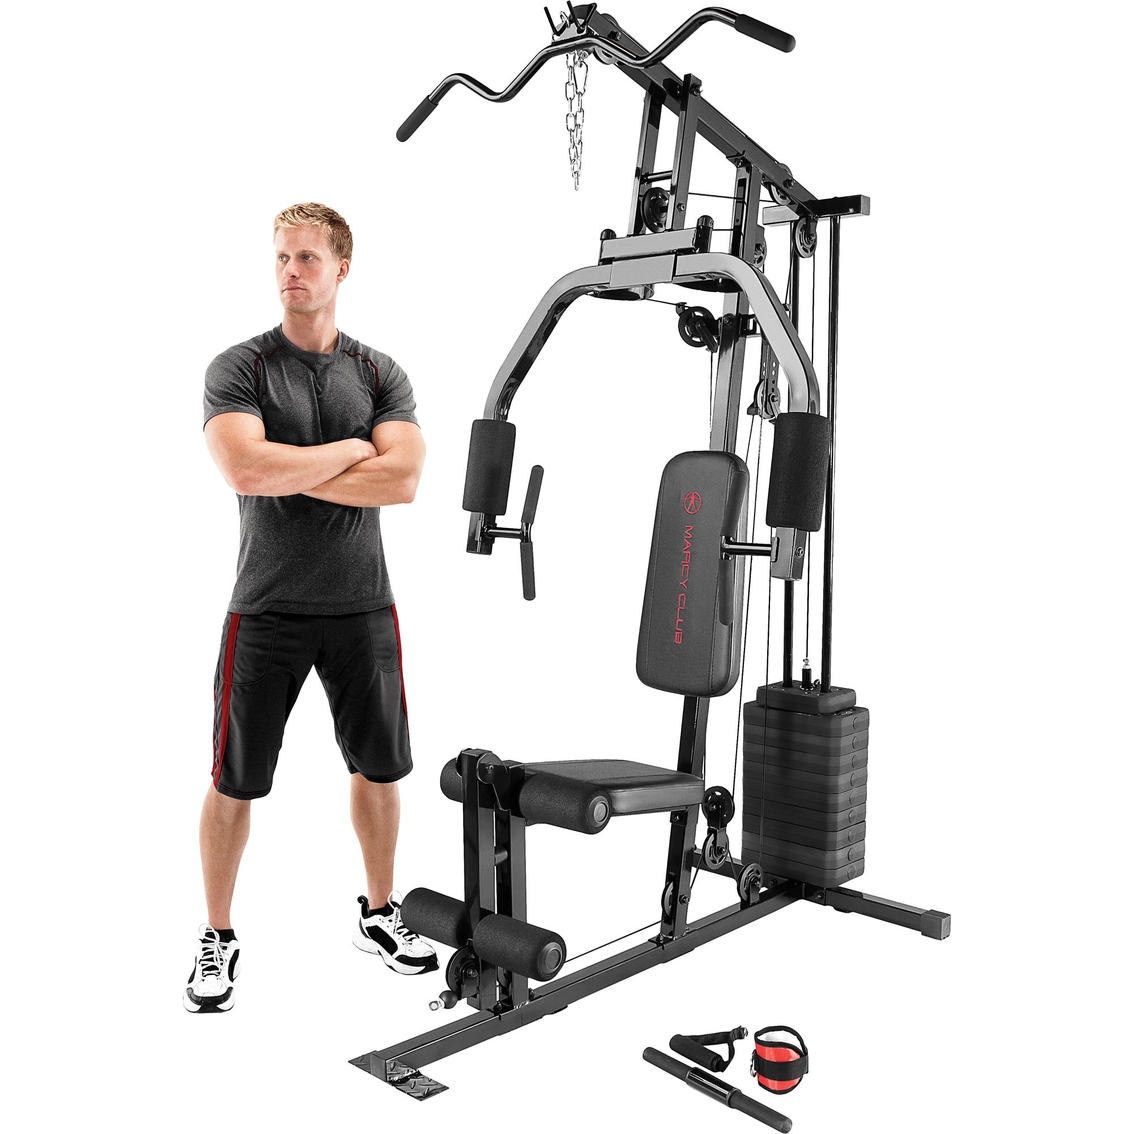 Marcy Home Gym with 100 Lb. Without Shroud - Image 2 of 2